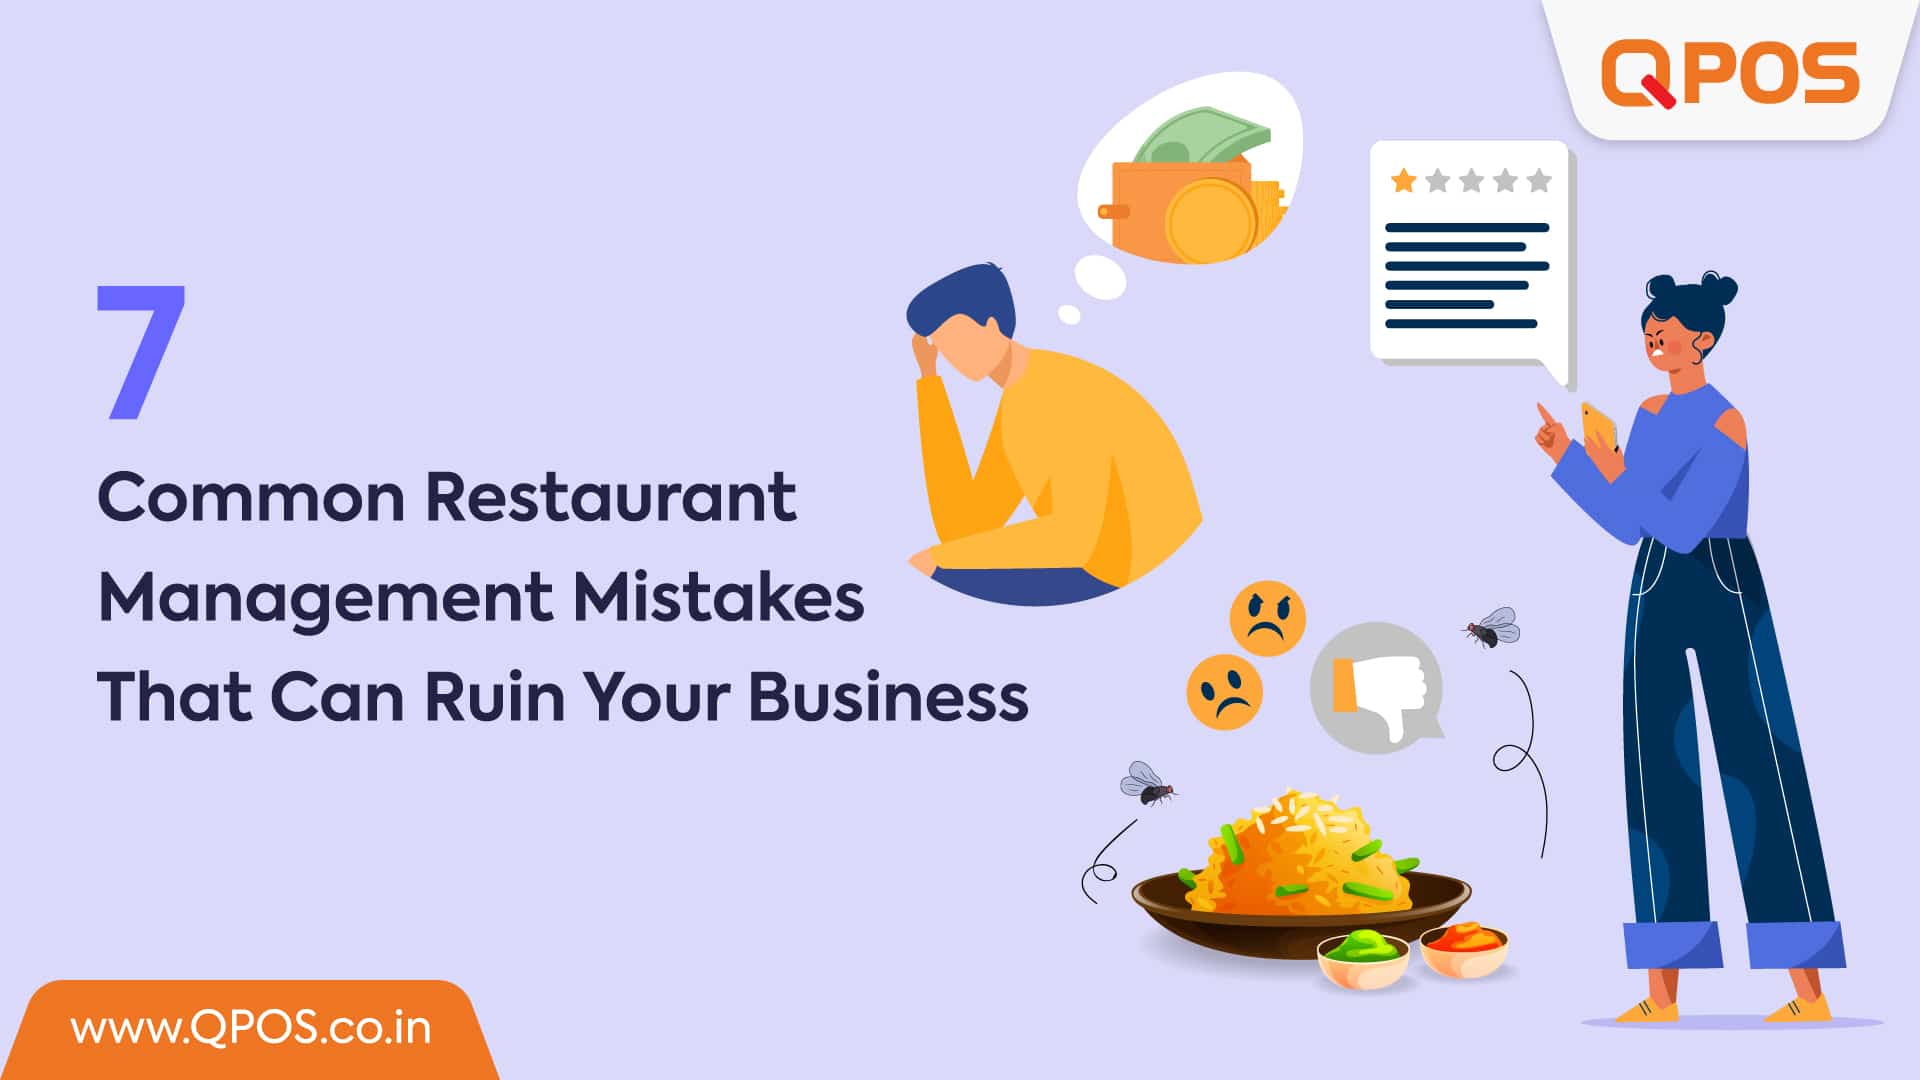 QPOS - 7 Common Restaurant Management Mistakes That Can Ruin Your Business